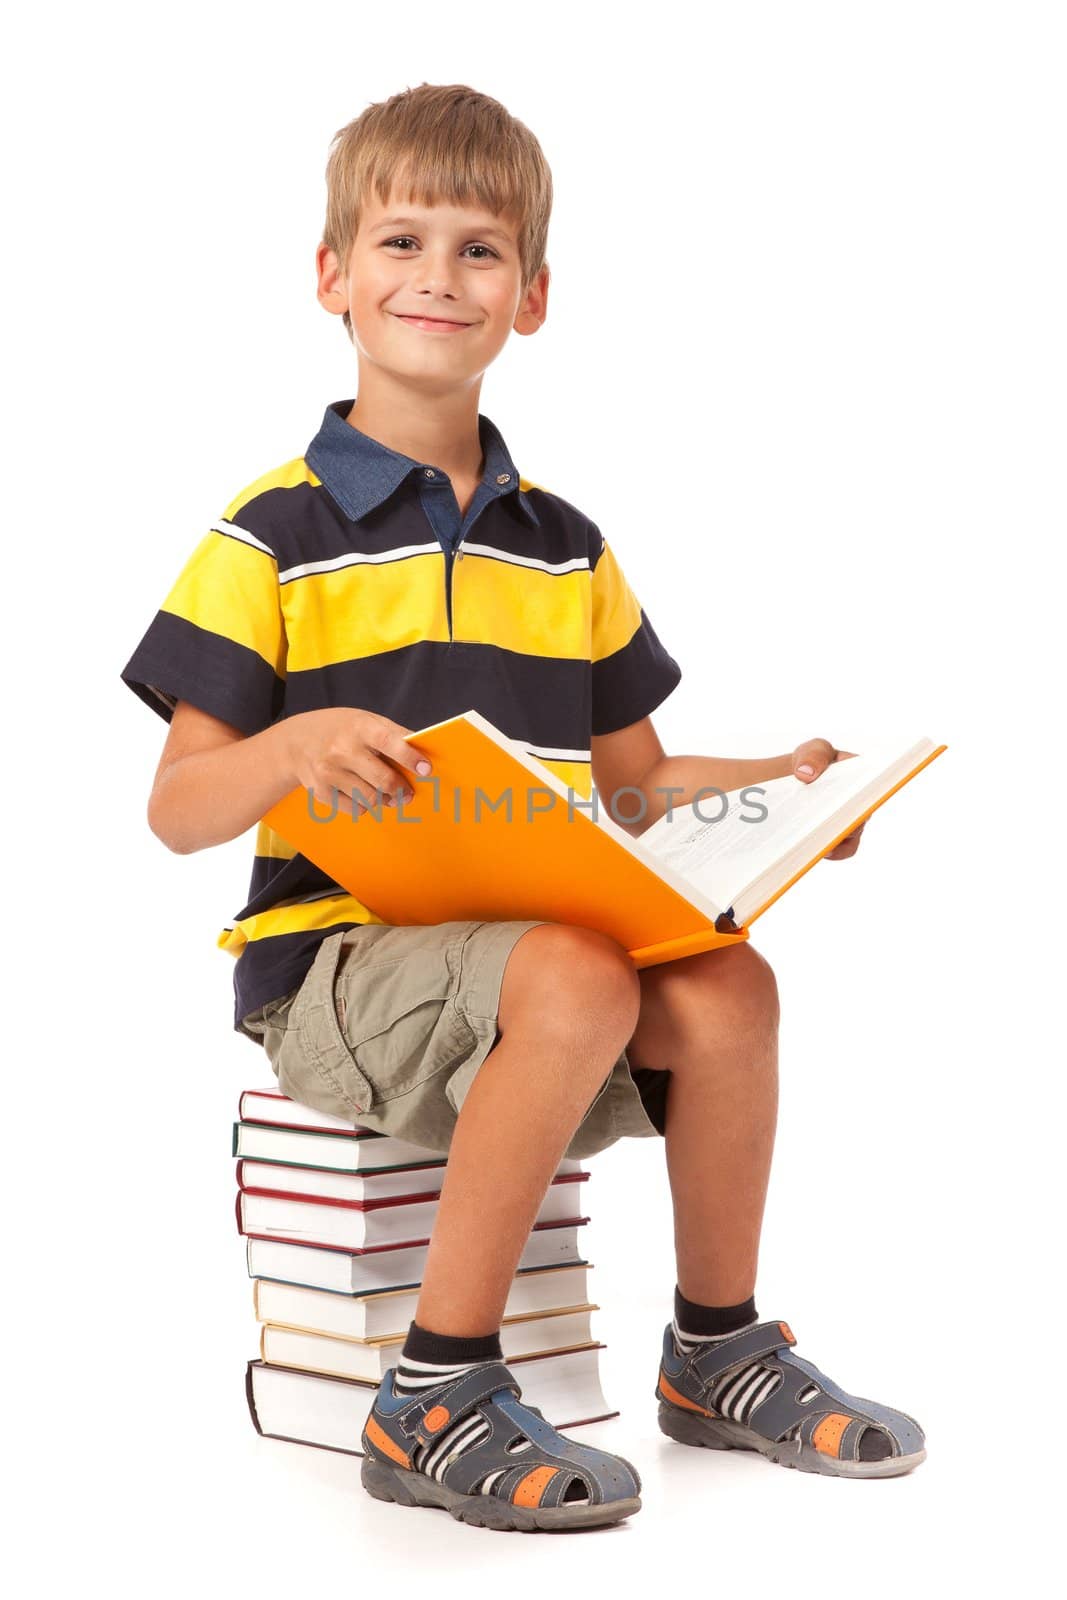 Schoolboy is sitting on books isolated on a white background